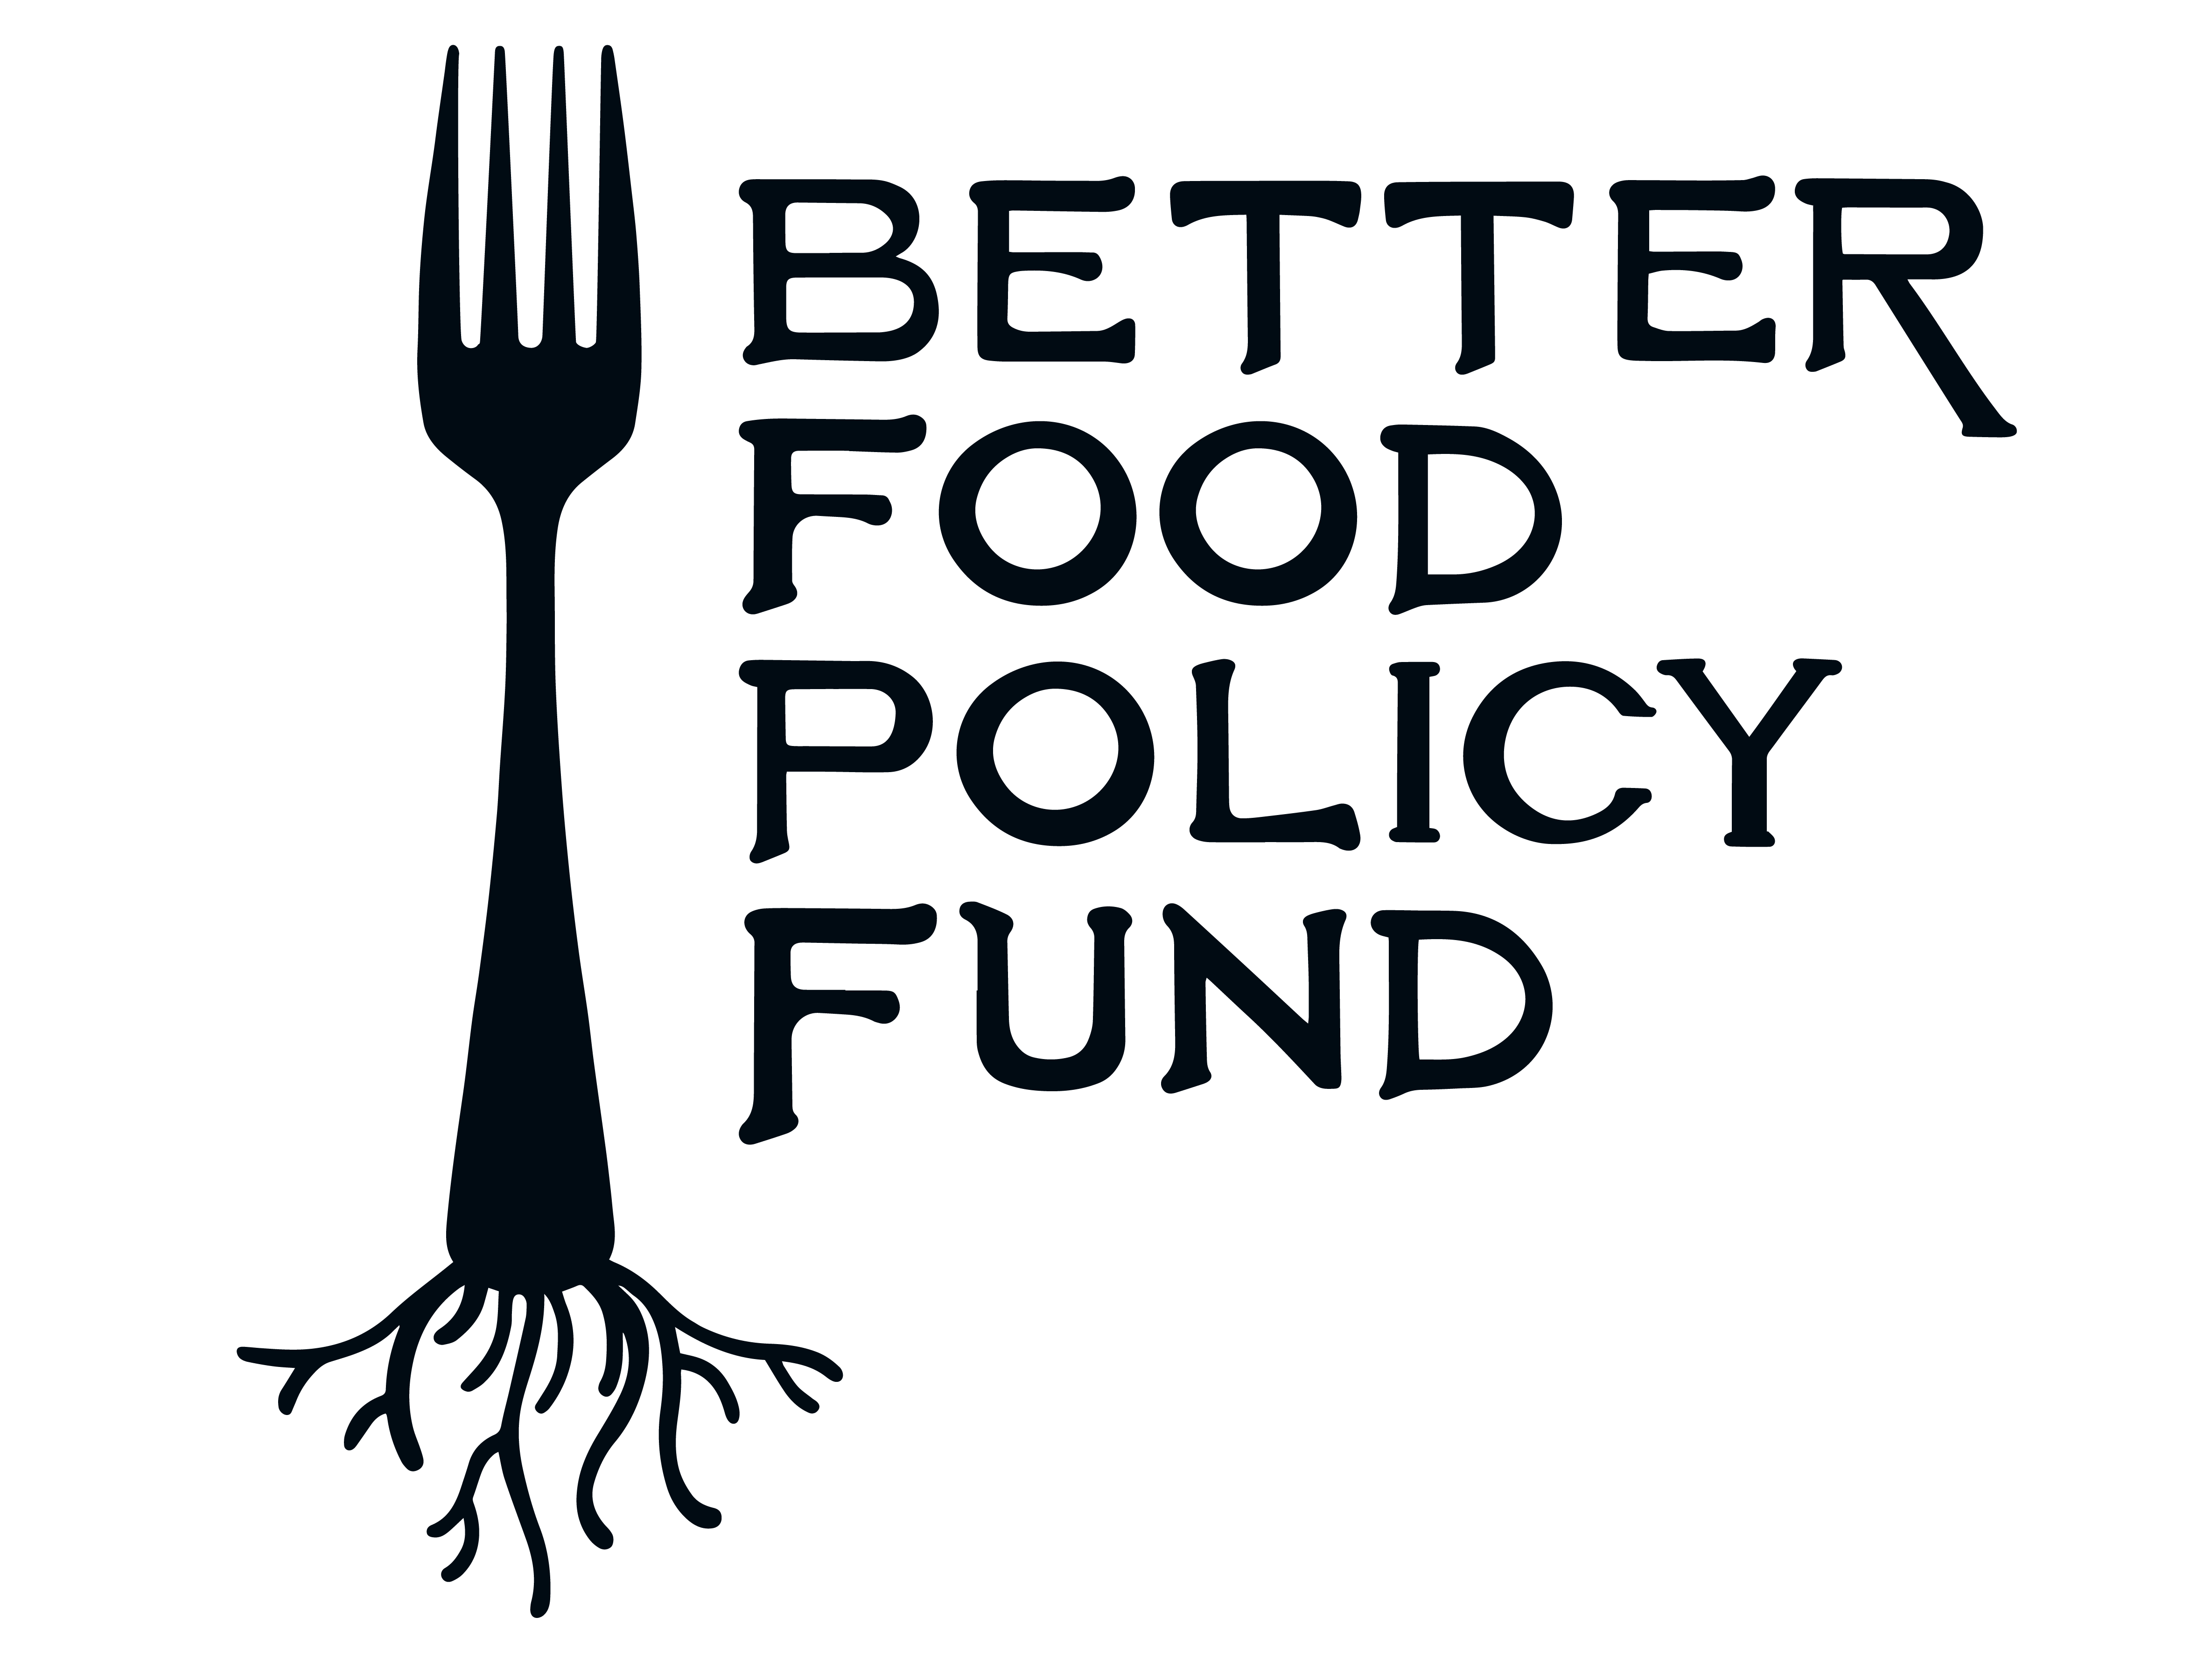 Better Food Policy Fund